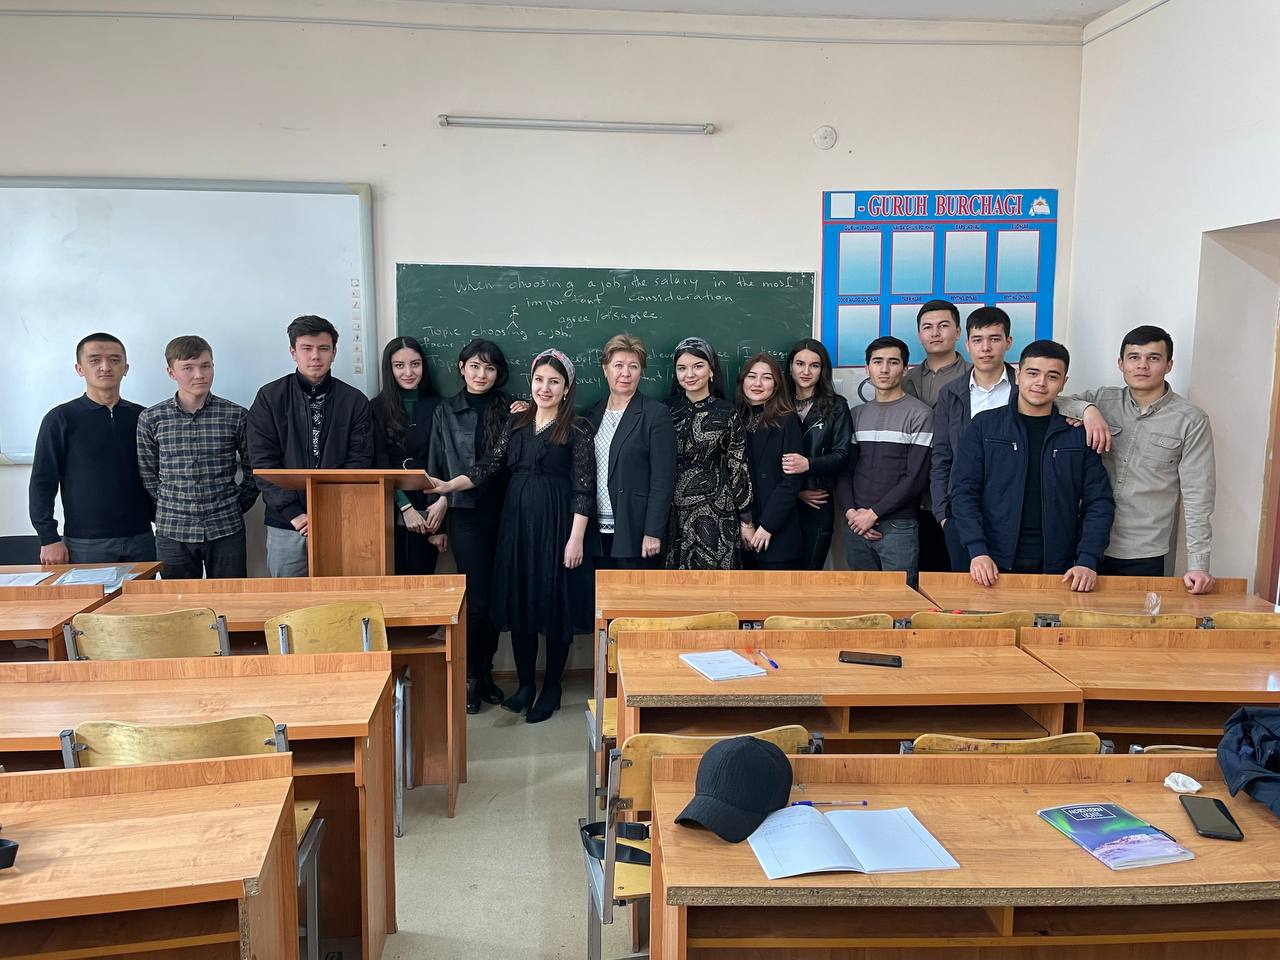 Since March 2, 2022 at the Faculty of Tourism and Economics I.Semenova, associate professor of Udmurtekogo State University of the Russian Federation,